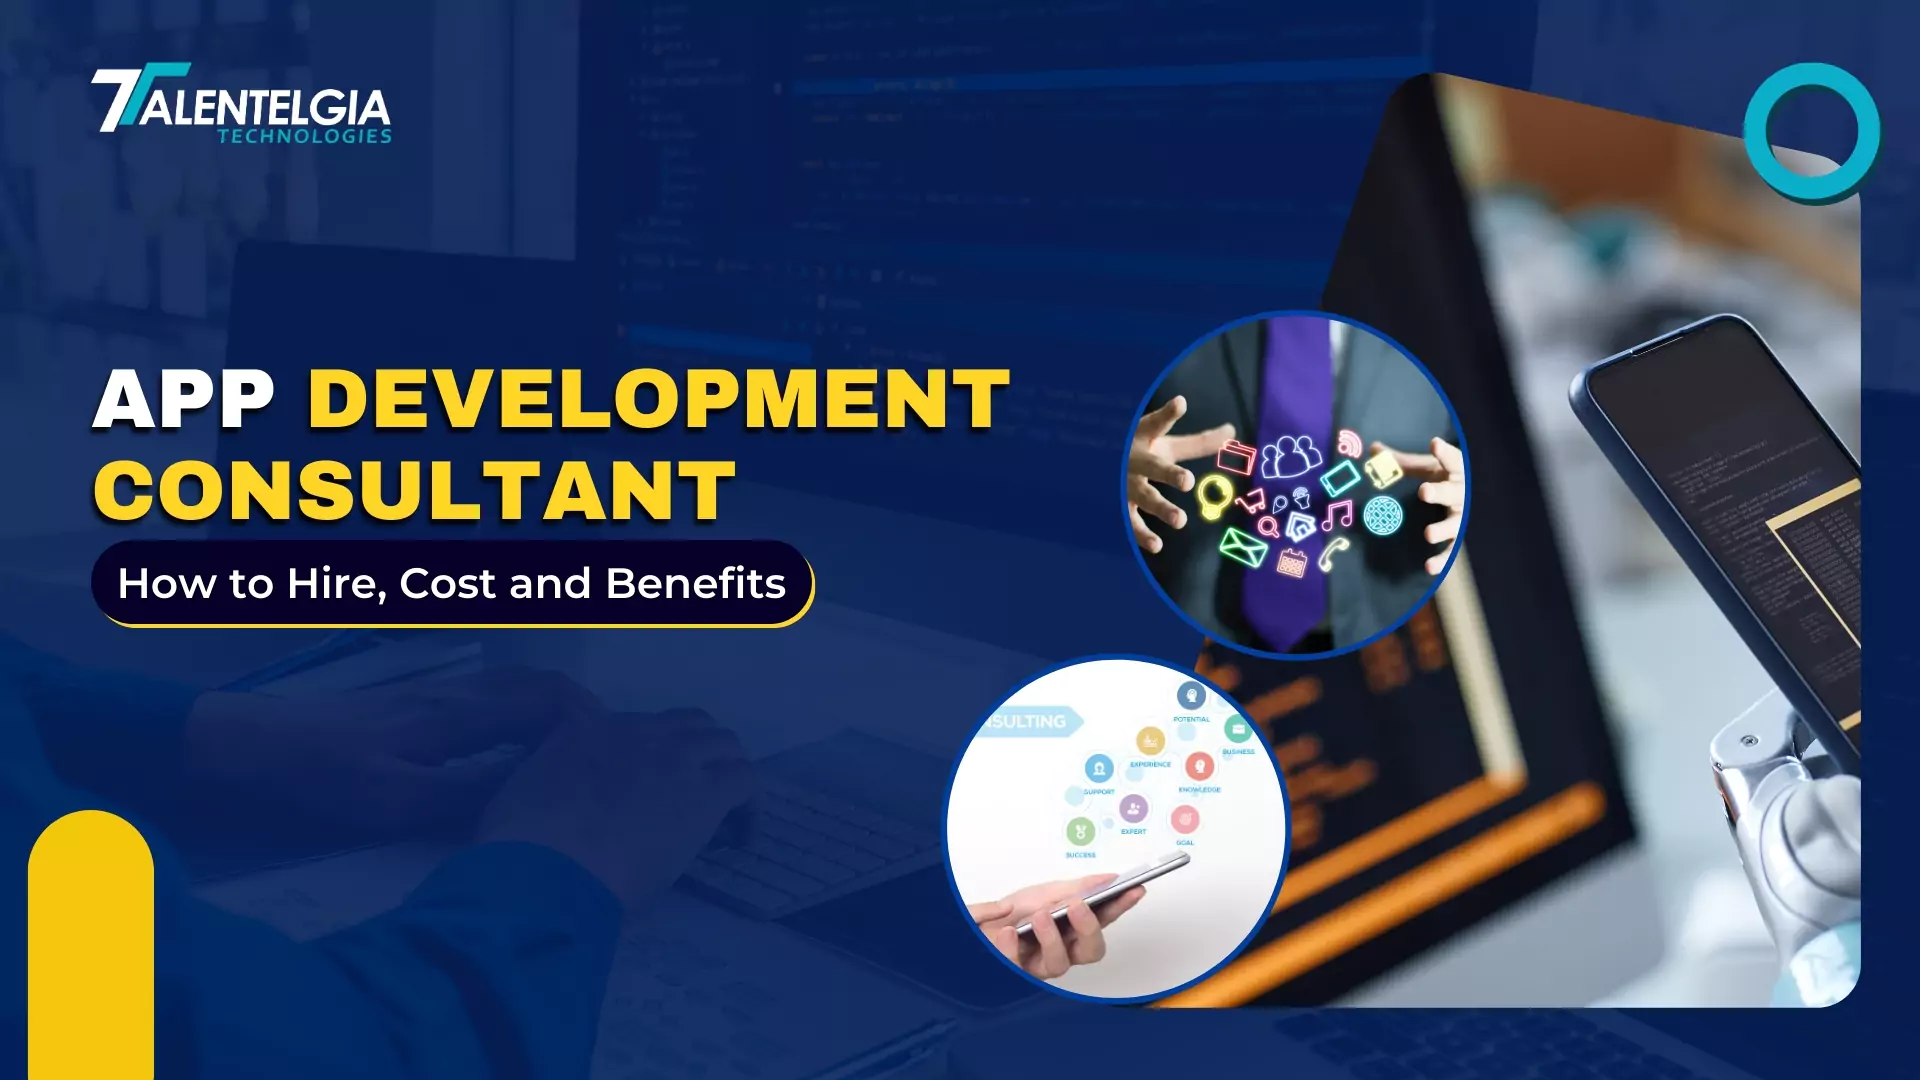 App Development Consultant: How to Hire, Cost and Benefits